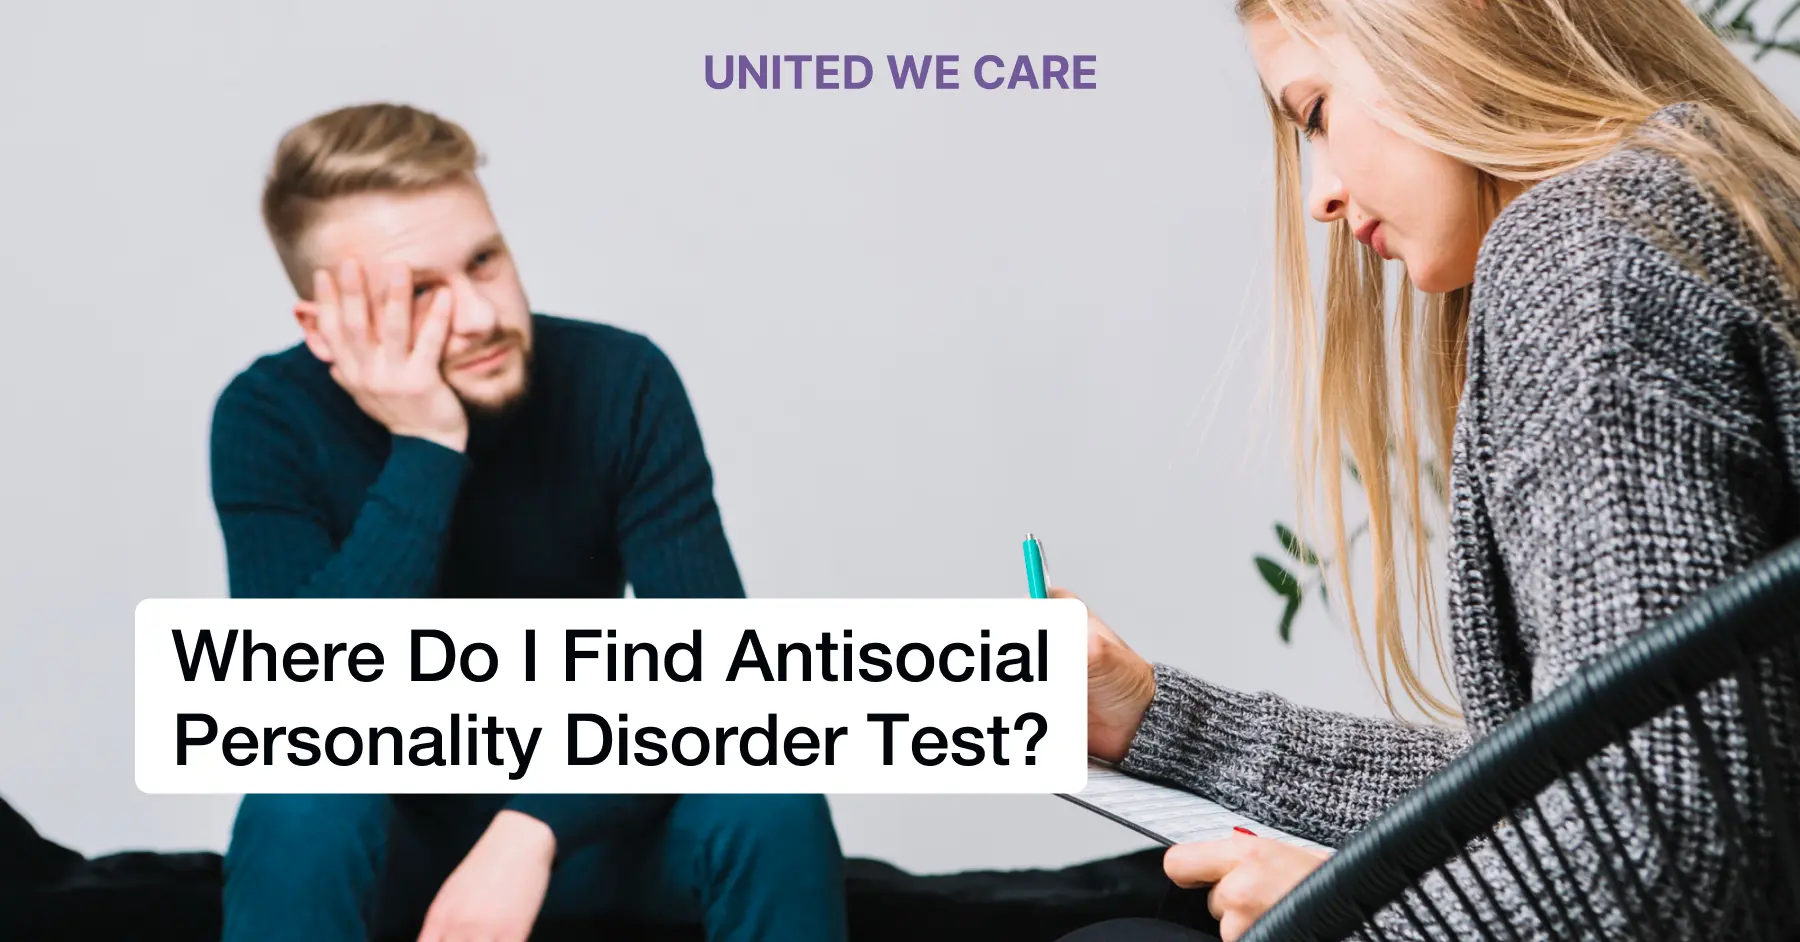 Where Do I Find Antisocial Personality Disorder Test?